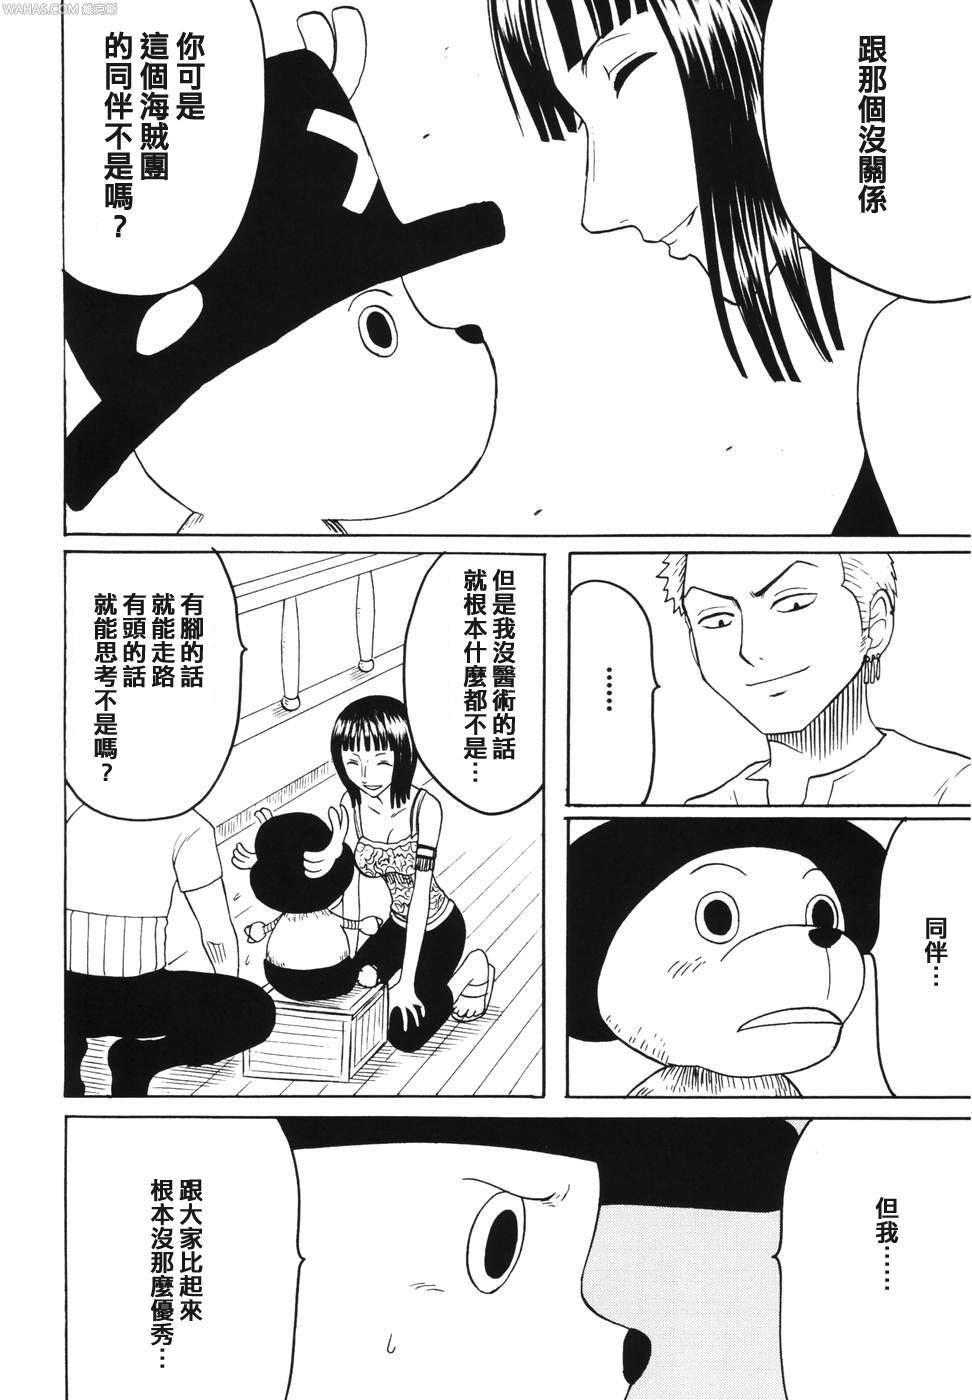 Blackcock Dancing Animation Run - One piece Firsttime - Page 3